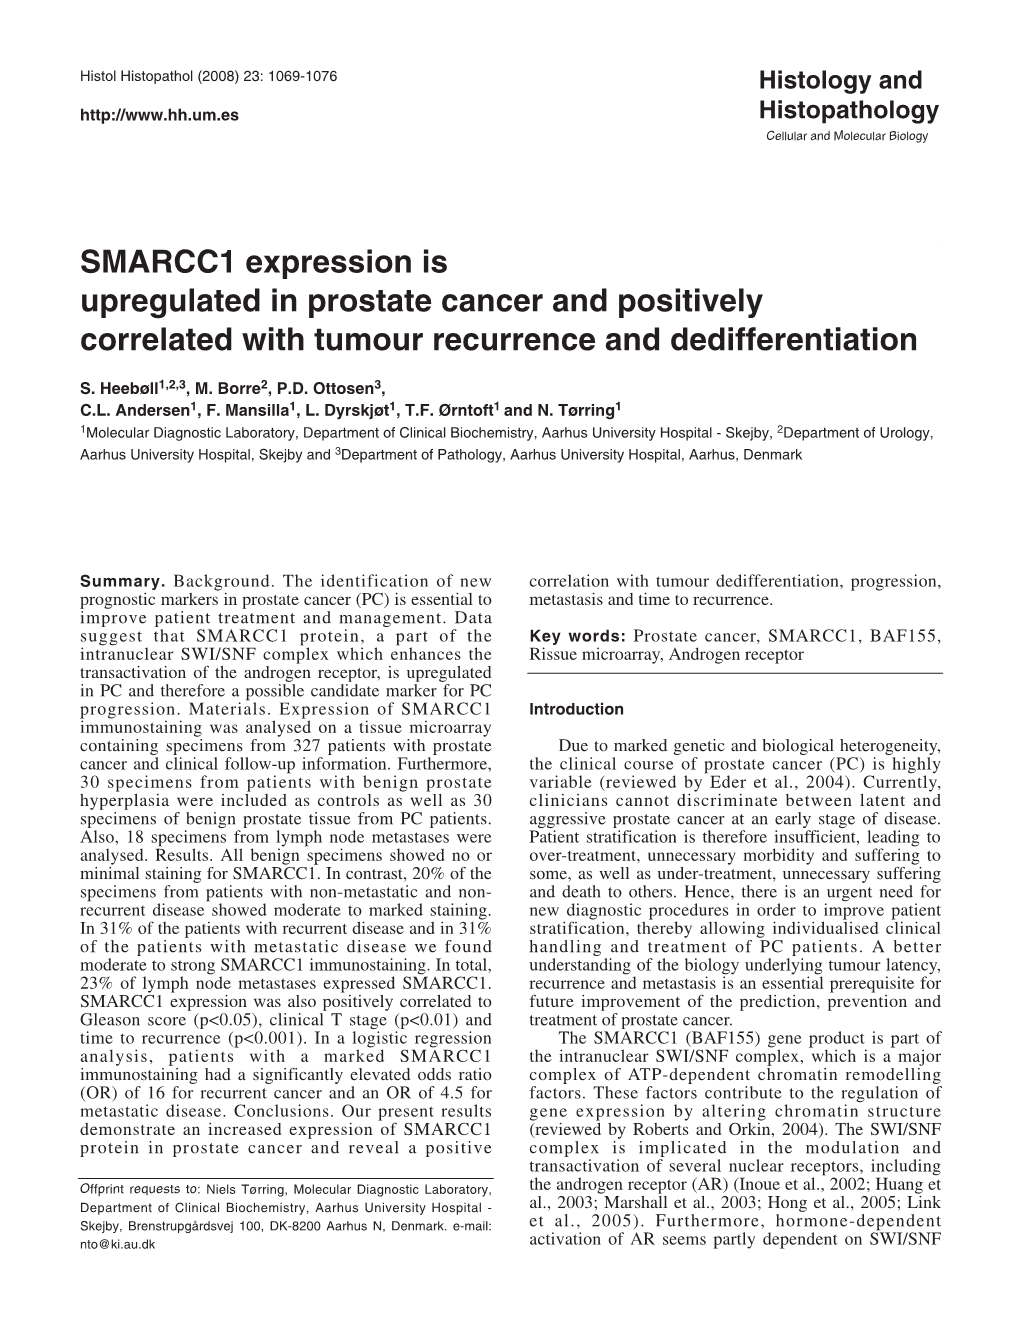 SMARCC1 Expression Is Upregulated in Prostate Cancer and Positively Correlated with Tumour Recurrence and Dedifferentiation